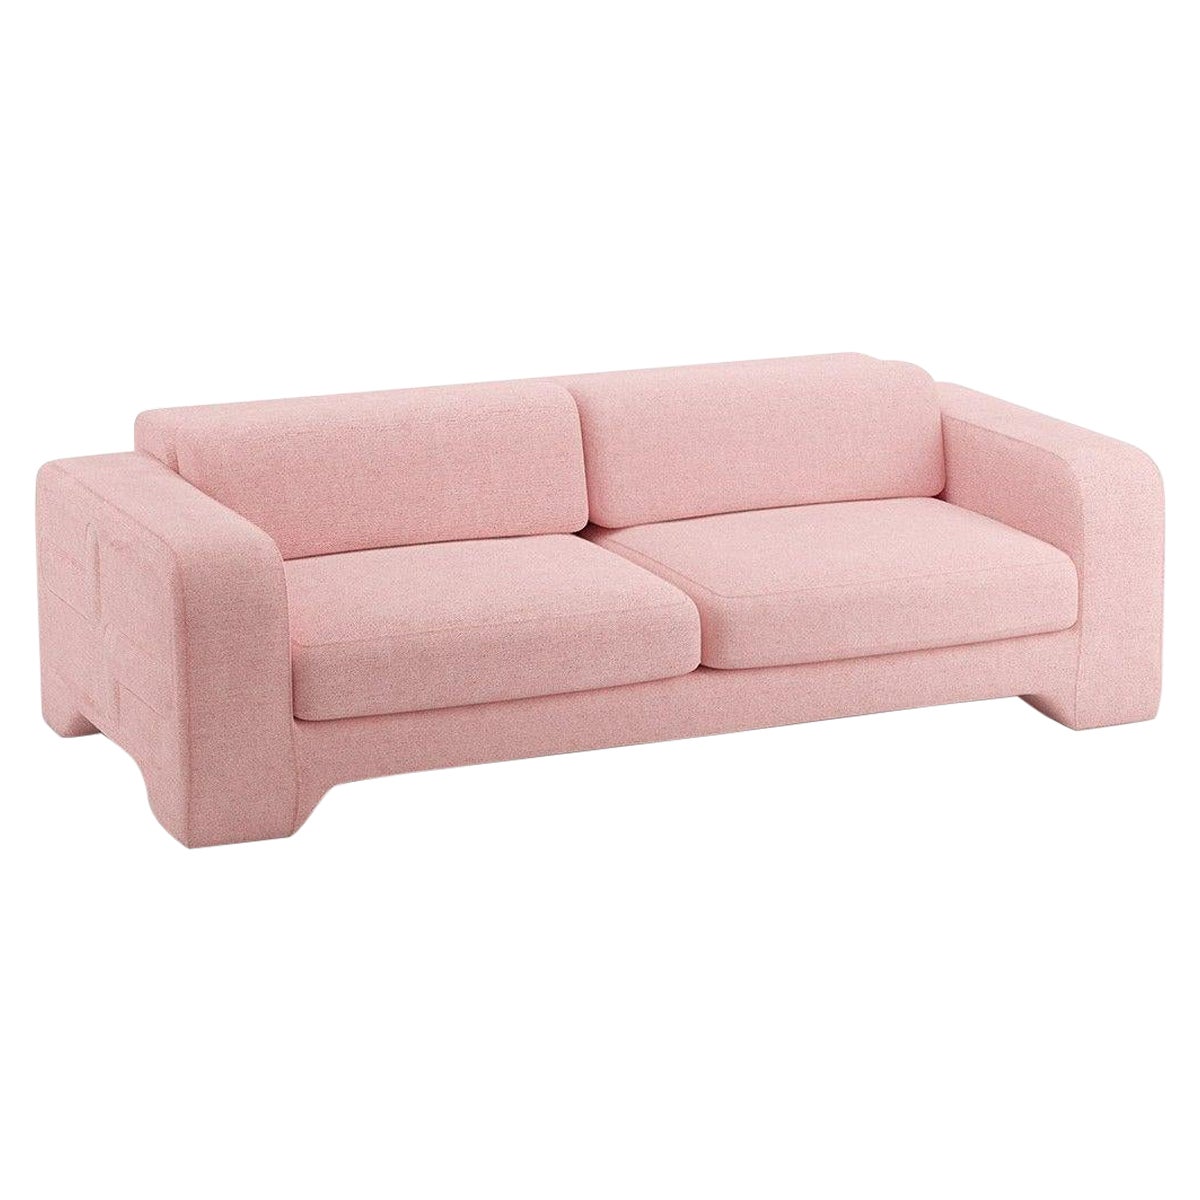 Popus Editions Giovanna 3 Seater Sofa in Pink Megeve Fabric with Knit Effect For Sale